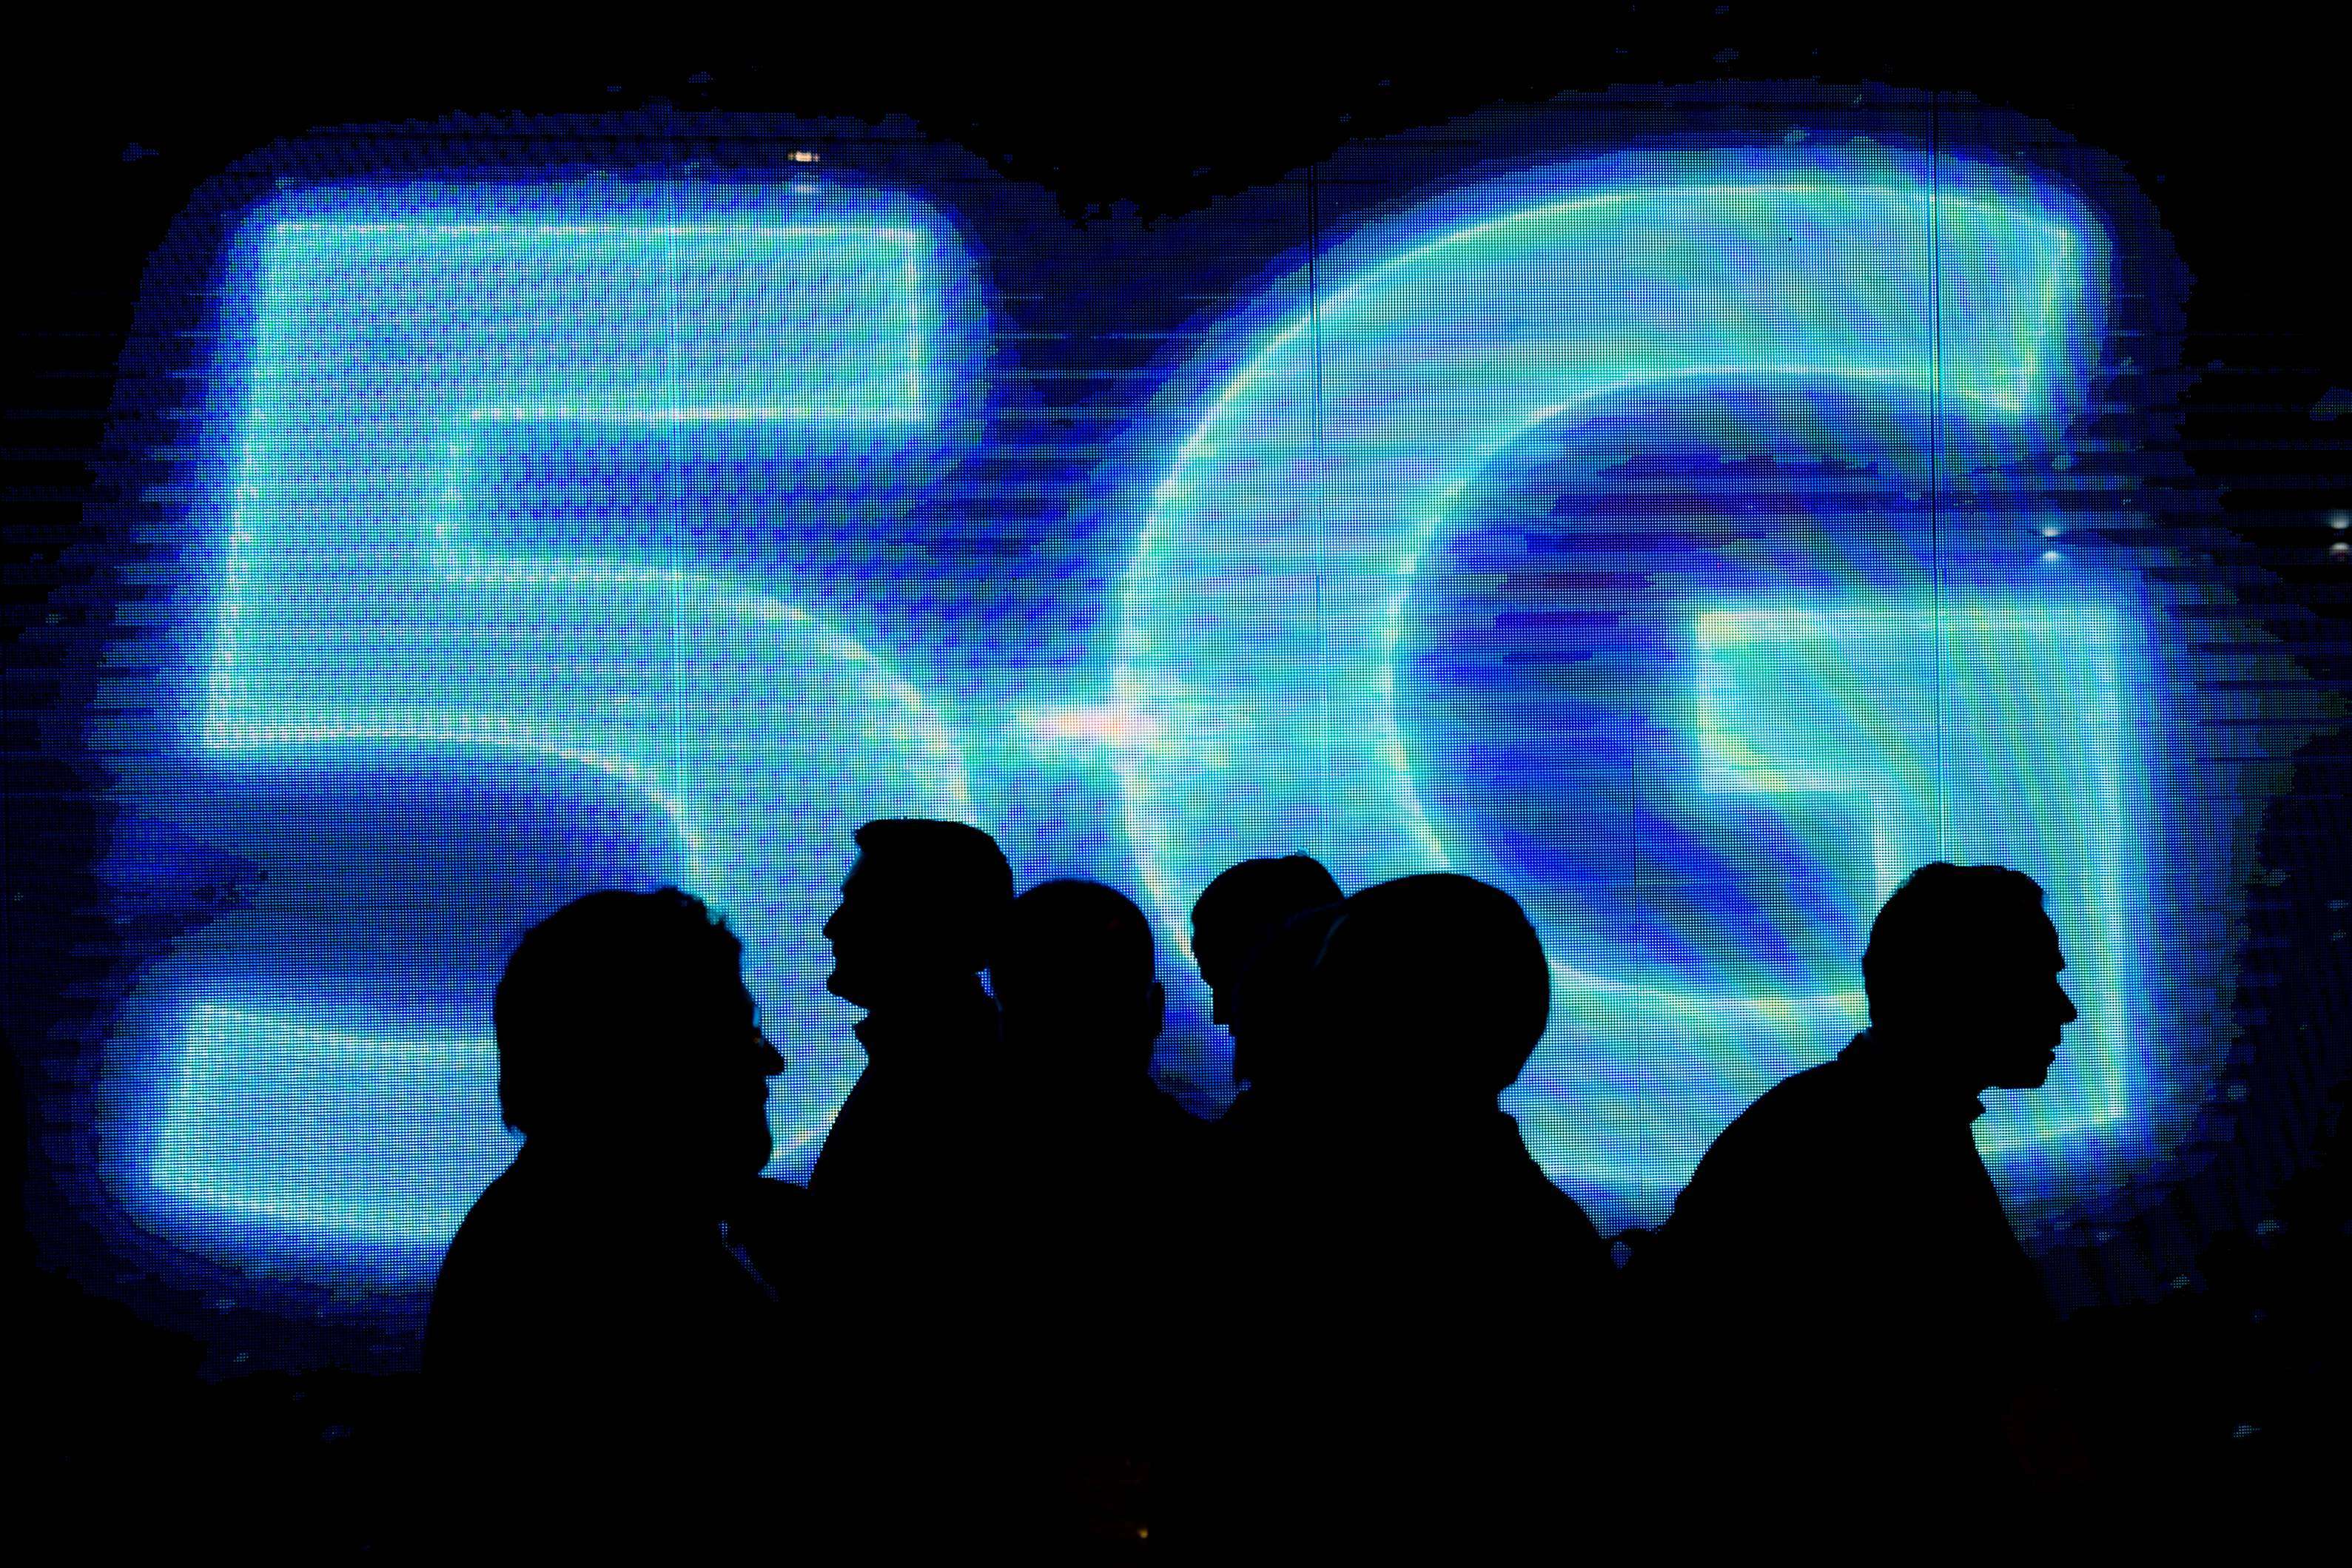 5G connectivity was one of the key themes at this year’s Mobile World Congress in Barcelona, Spain. Photo: AFP